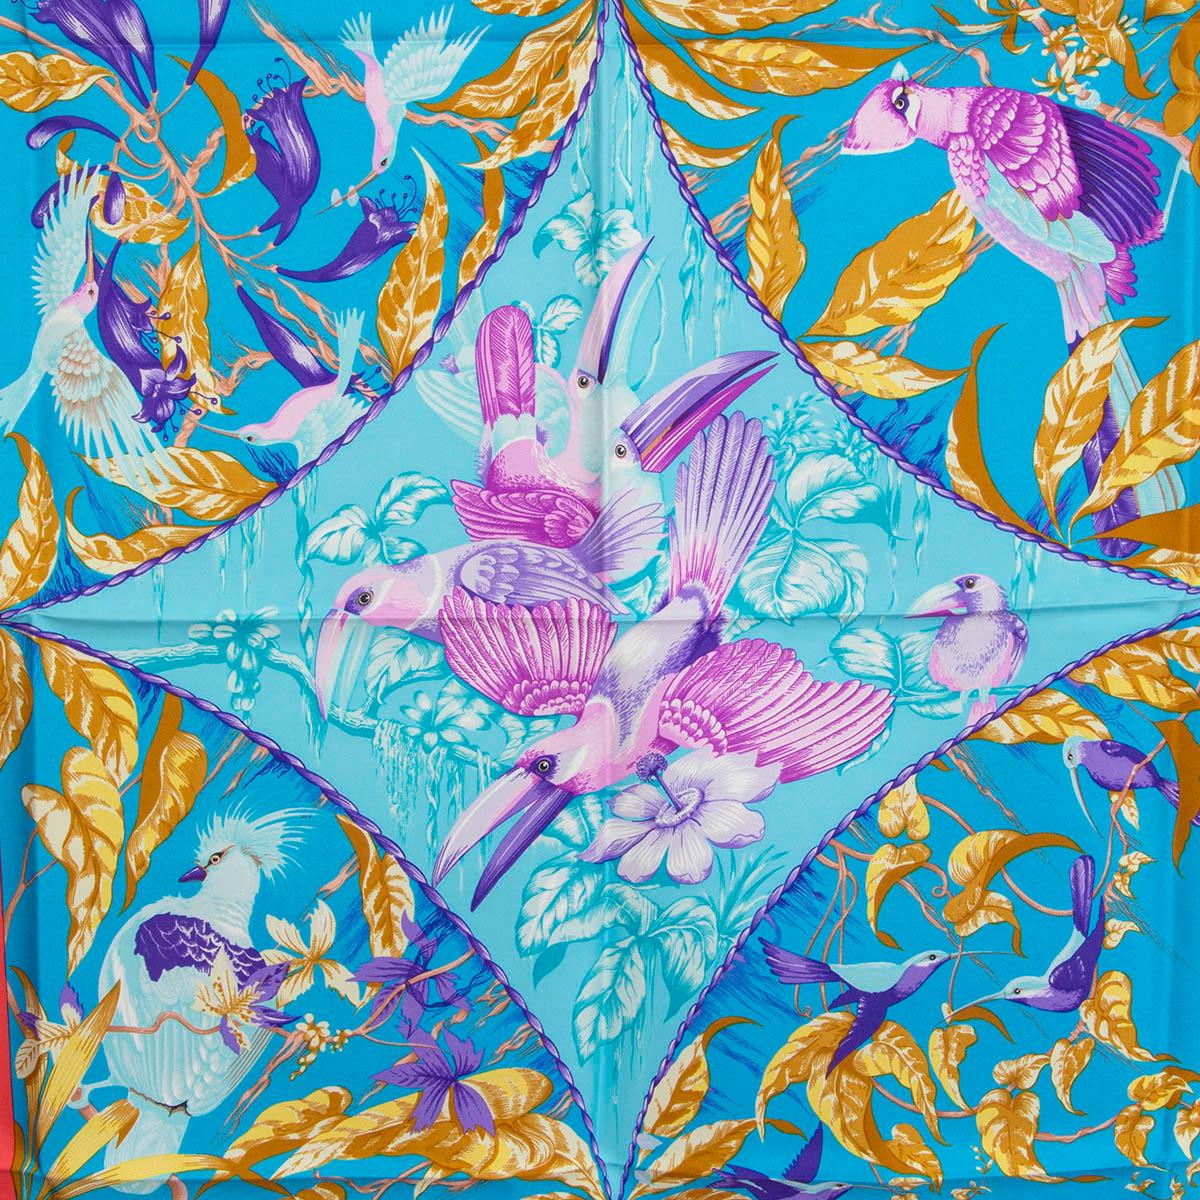 100% authentic Hermes 'Tropiques 90' scarf by Laurence Bourthoumieux in pink silk twill (100%) with details in turquoise, purple, yellow and gold. Has been worn and is in virtually new condition.

Measurements
Width	90cm (35.1in)
Length	90cm